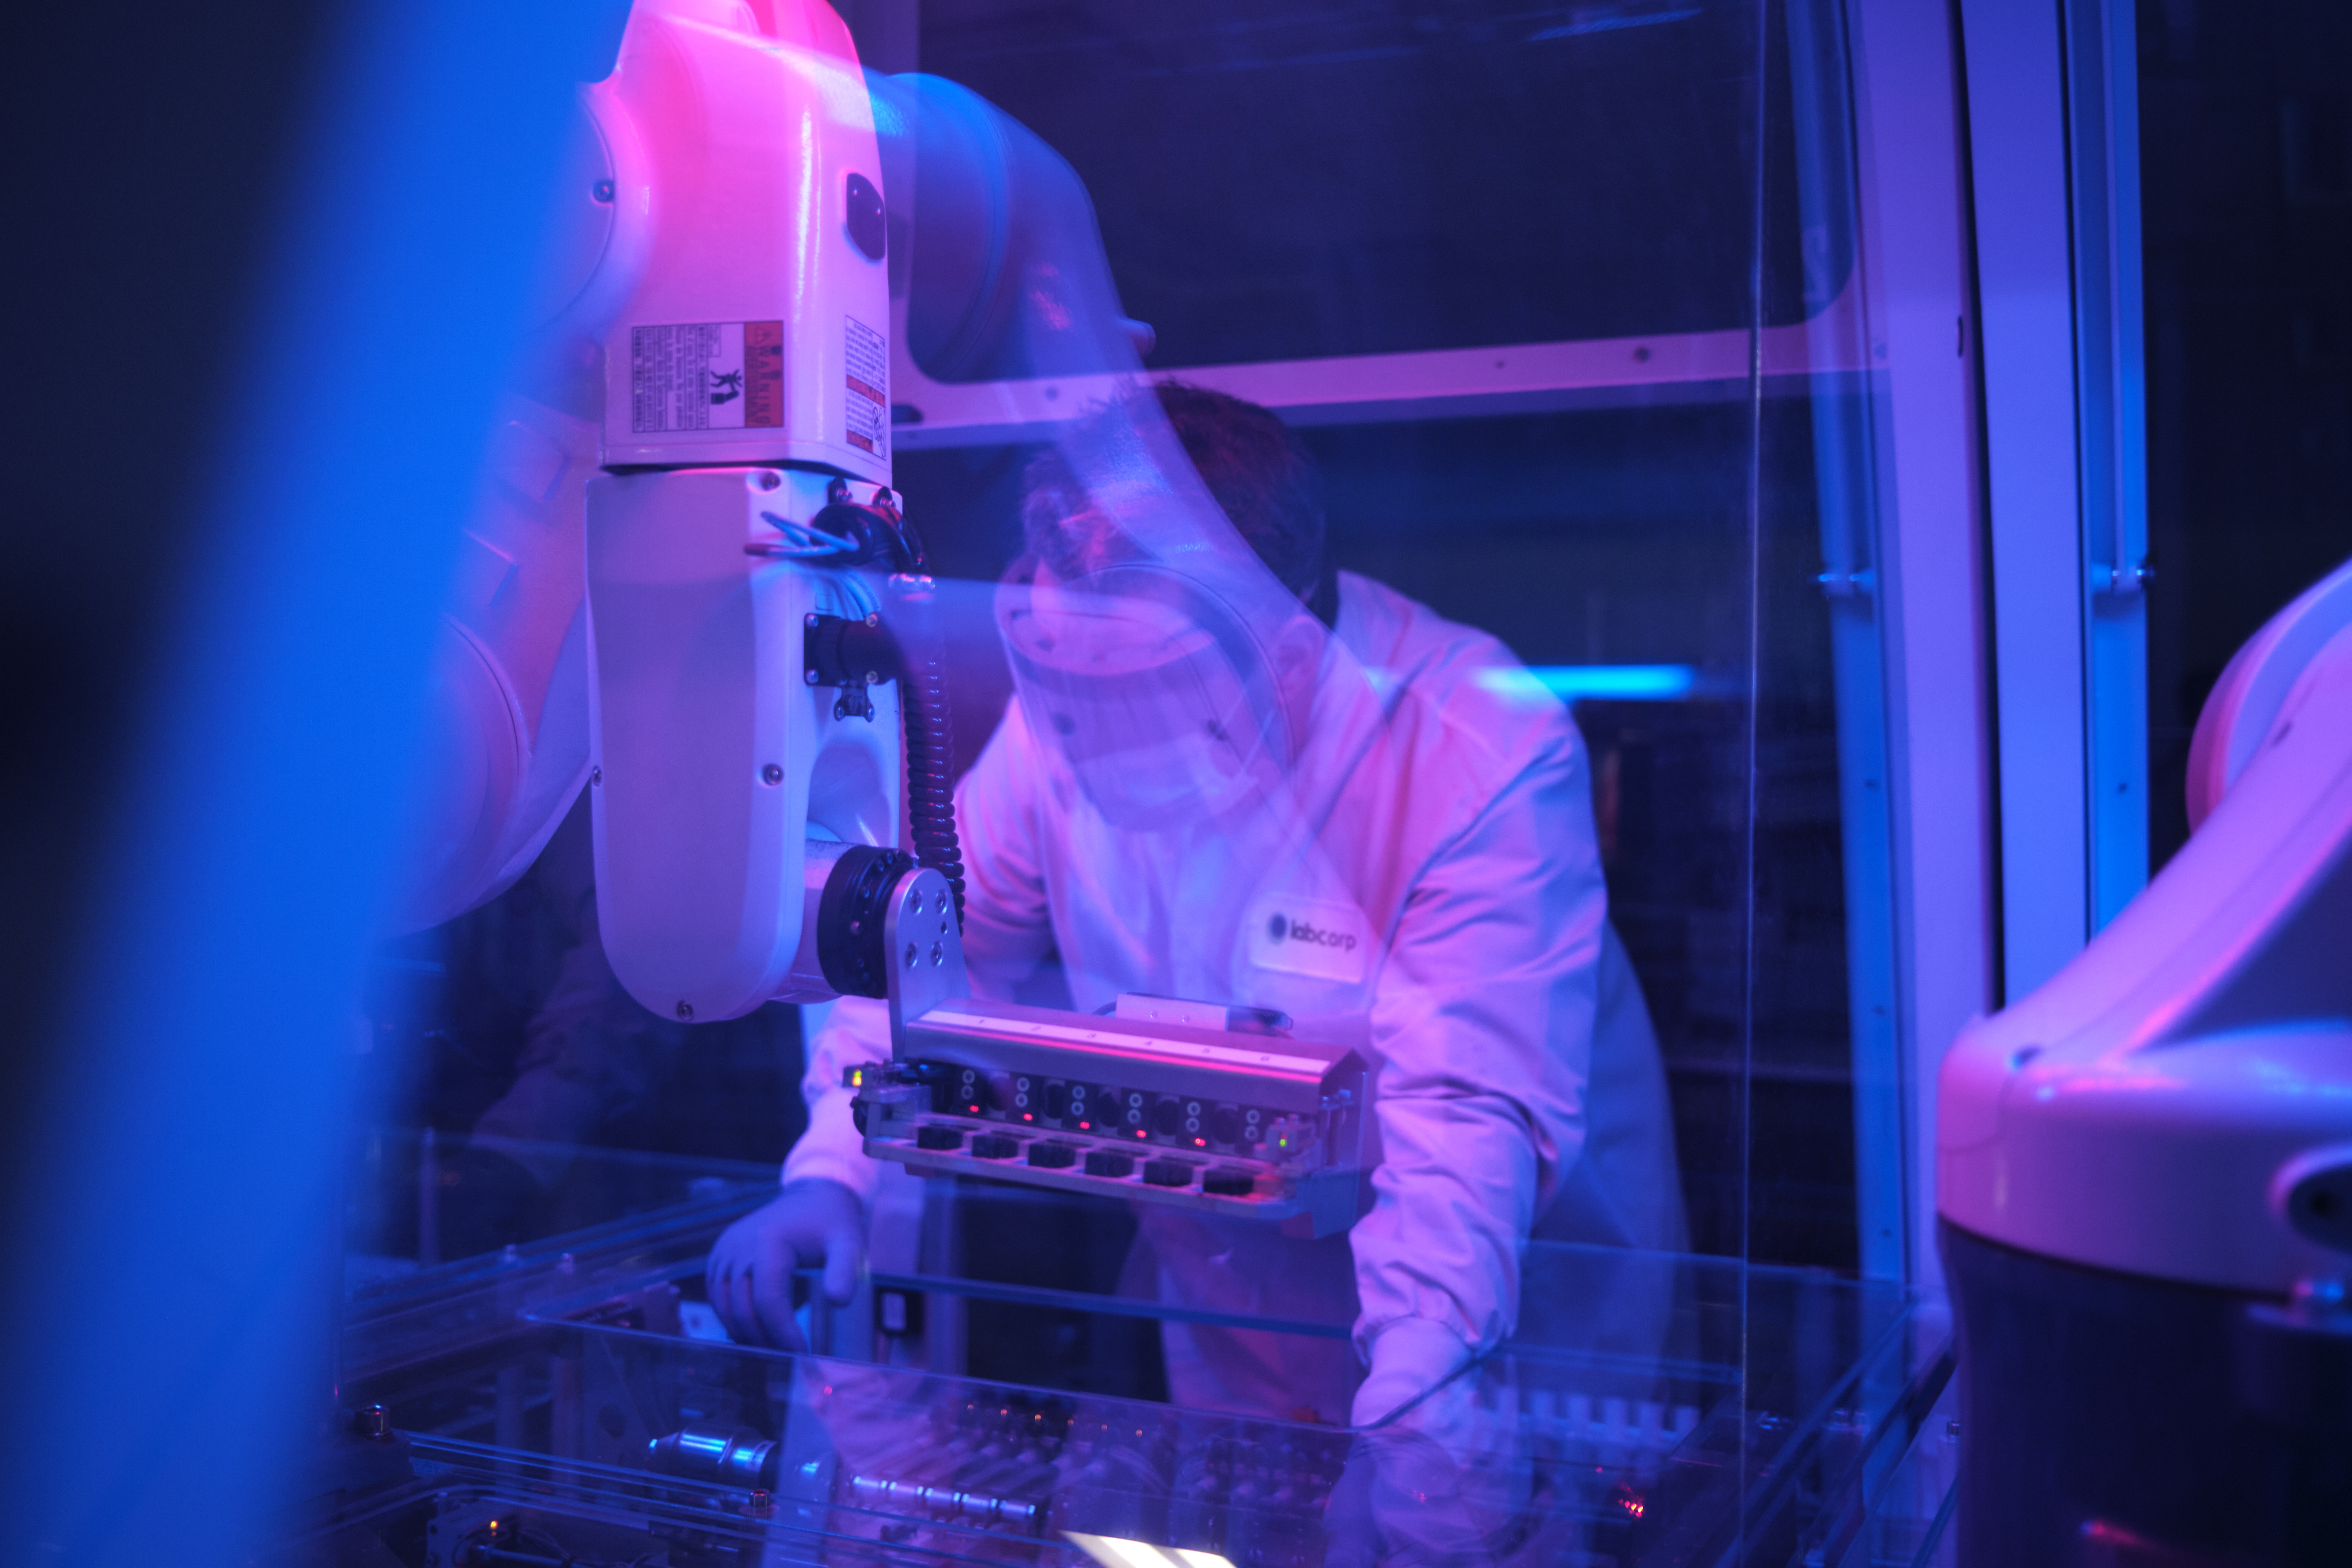 Labcorp scinetist in a lab with blue and purple lighting